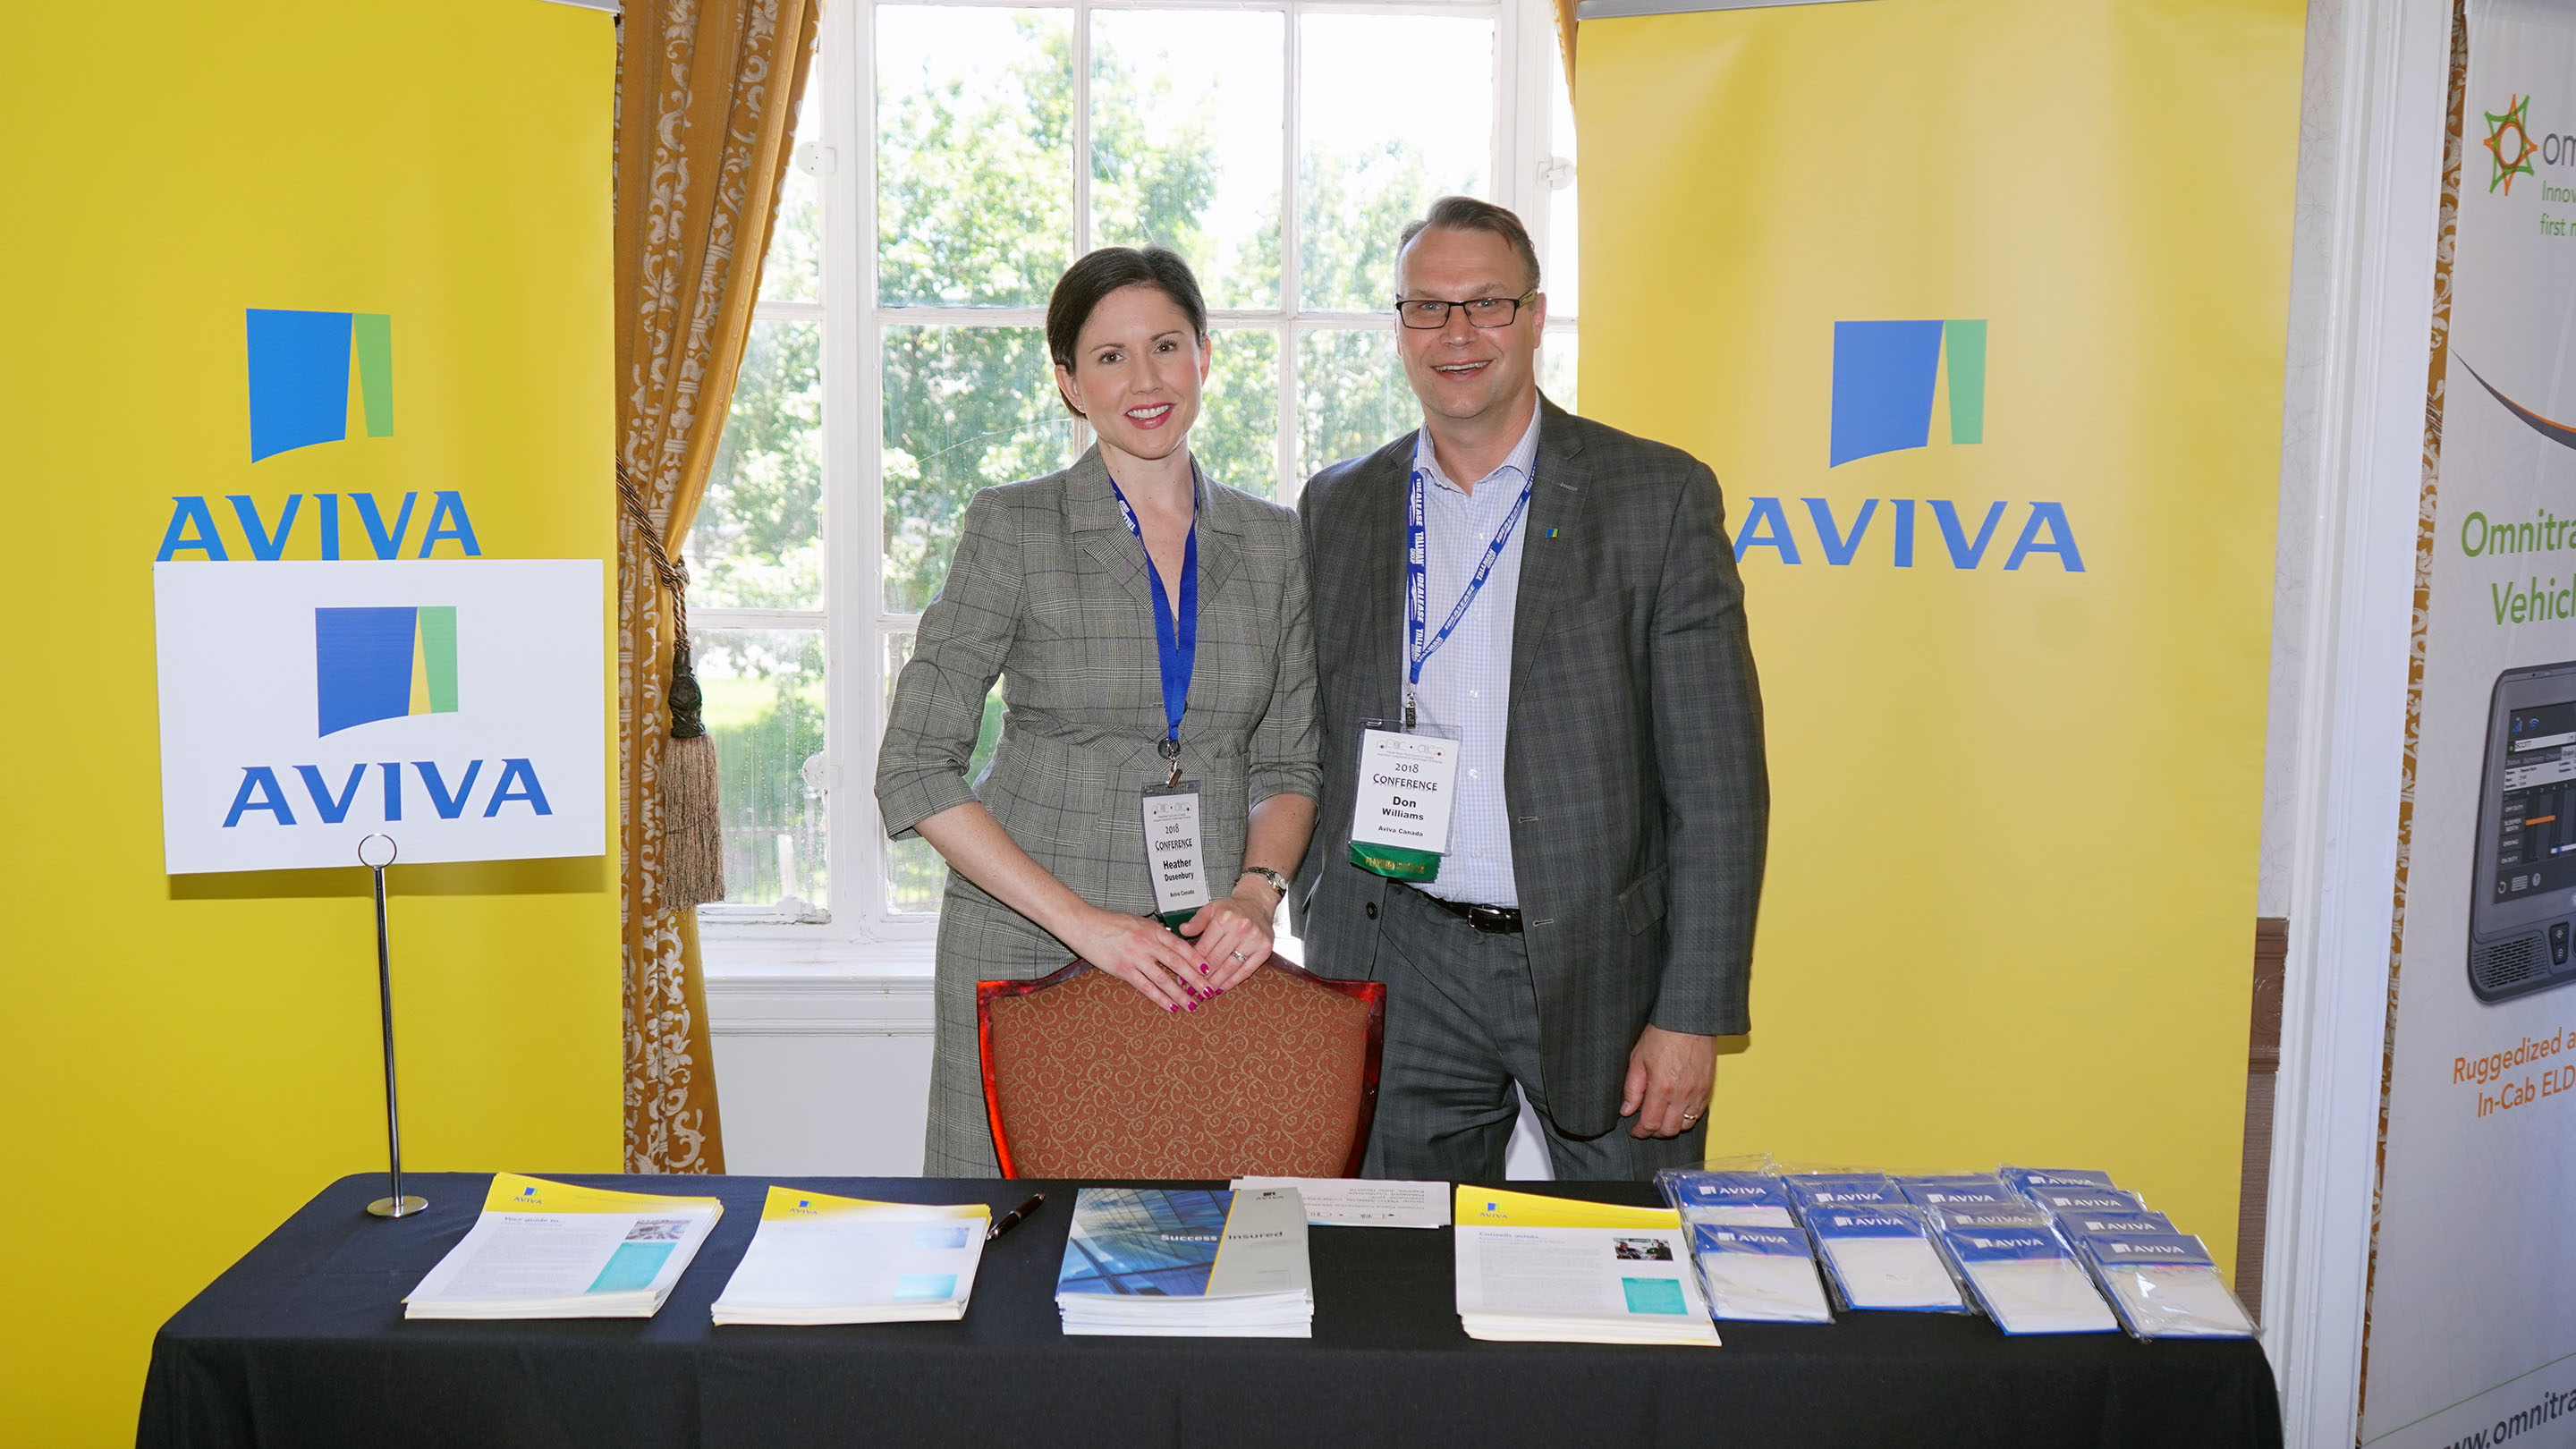 Heather and her boss, Don, at a stand at a conference